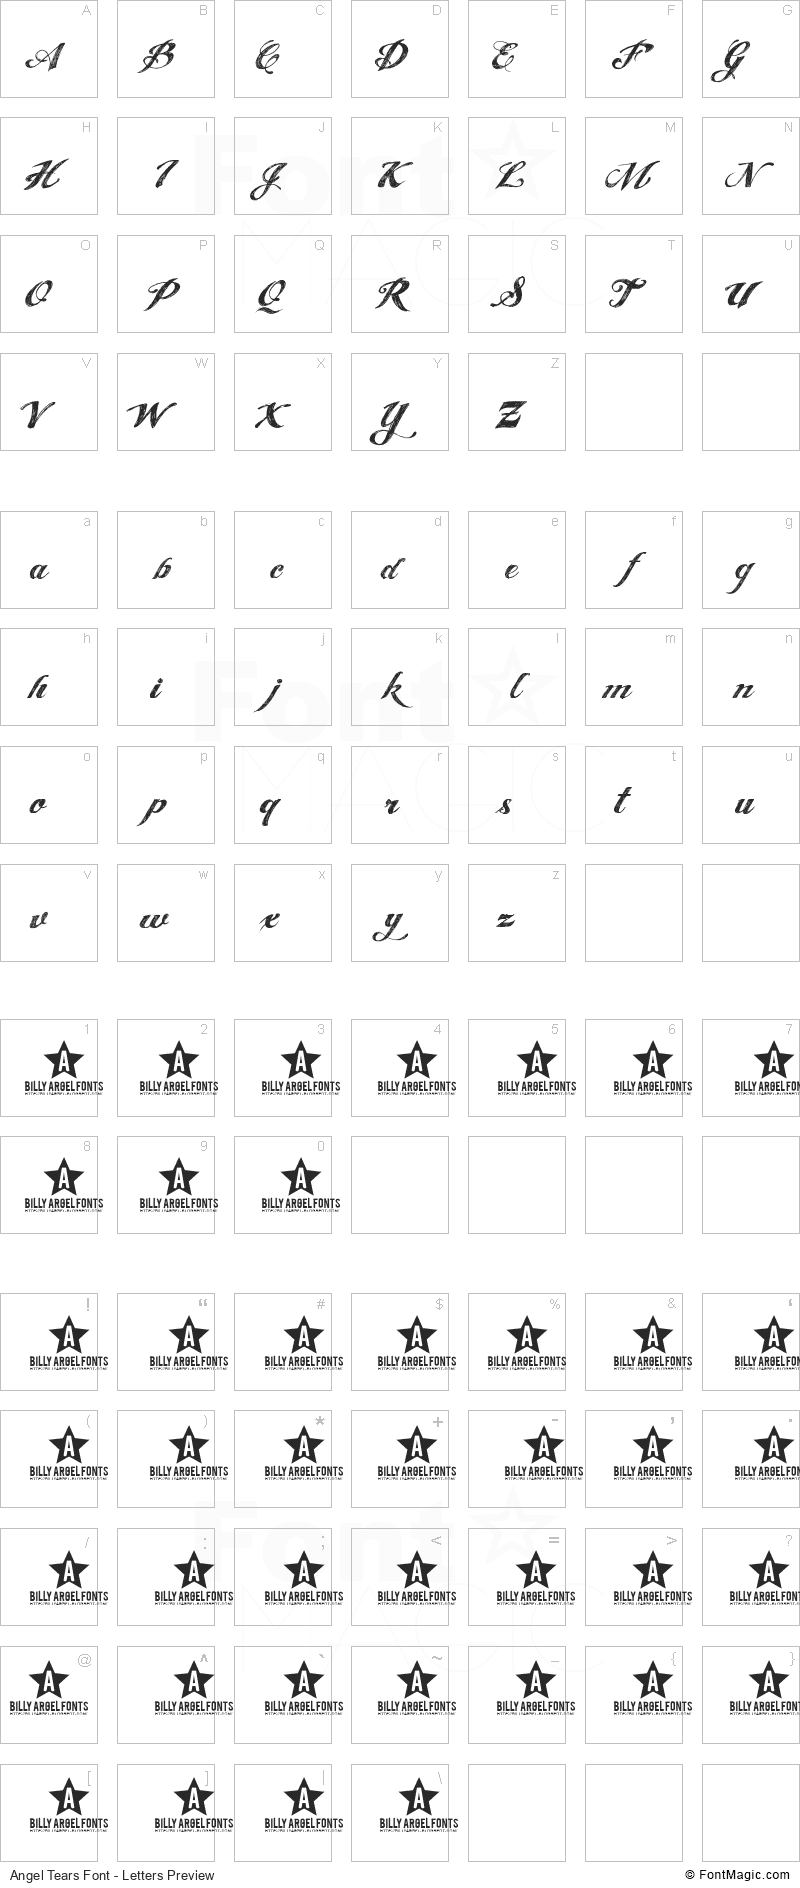 Angel Tears Font - All Latters Preview Chart